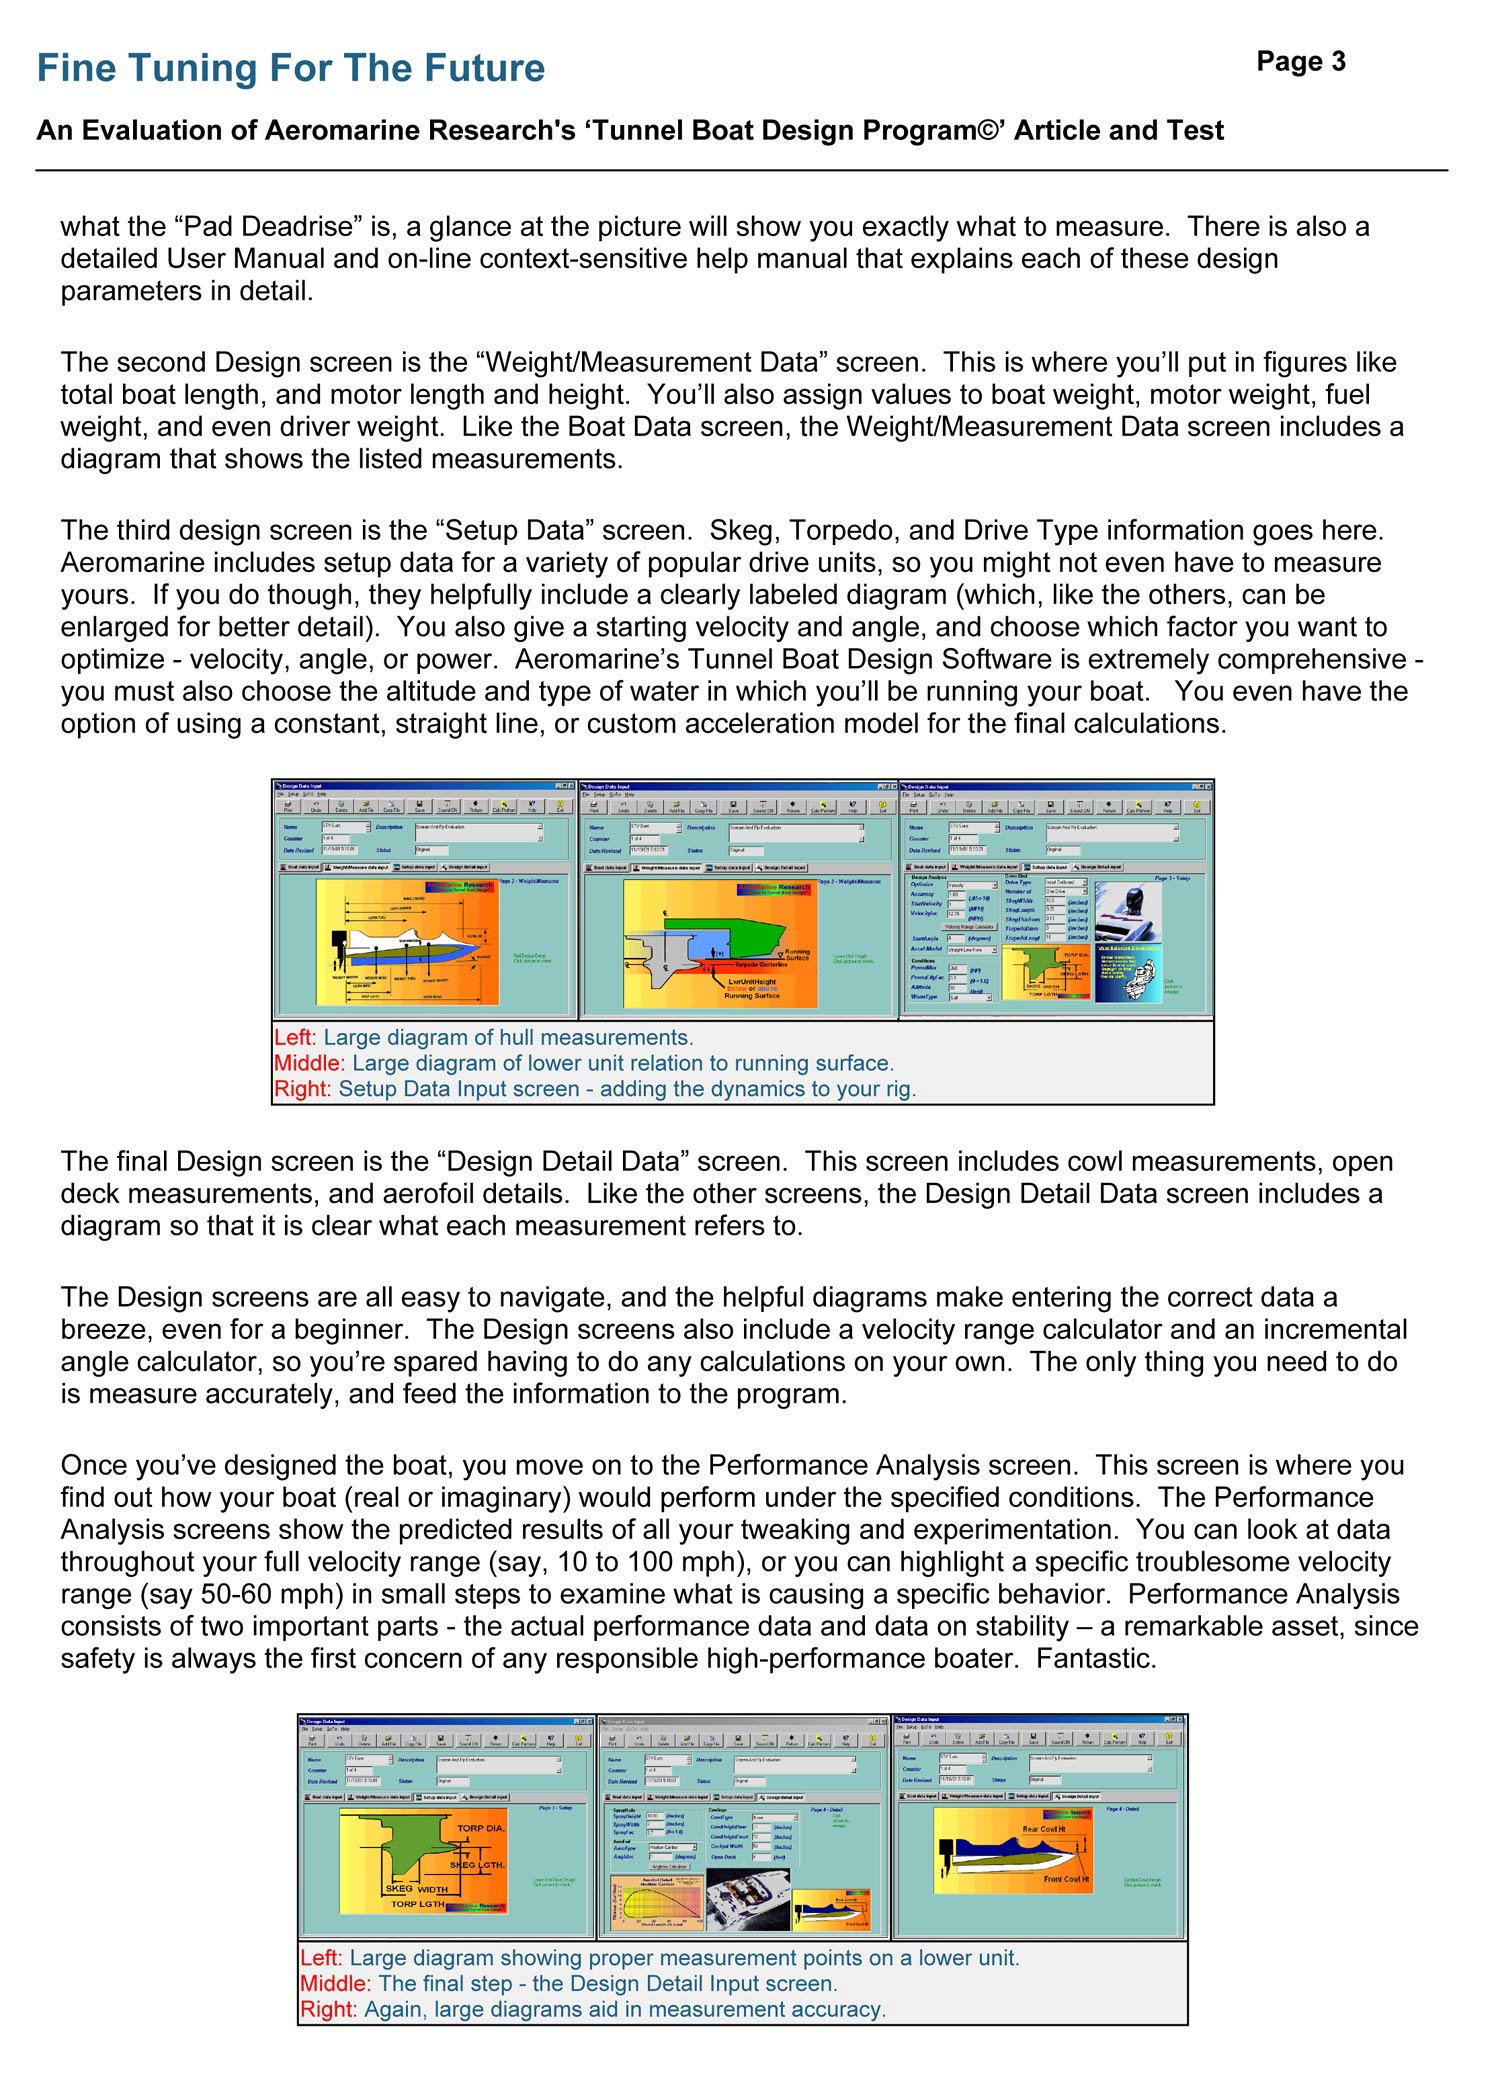  and Fly magazine Reviews "Tunnel Boat Design Program" (V6.5) software